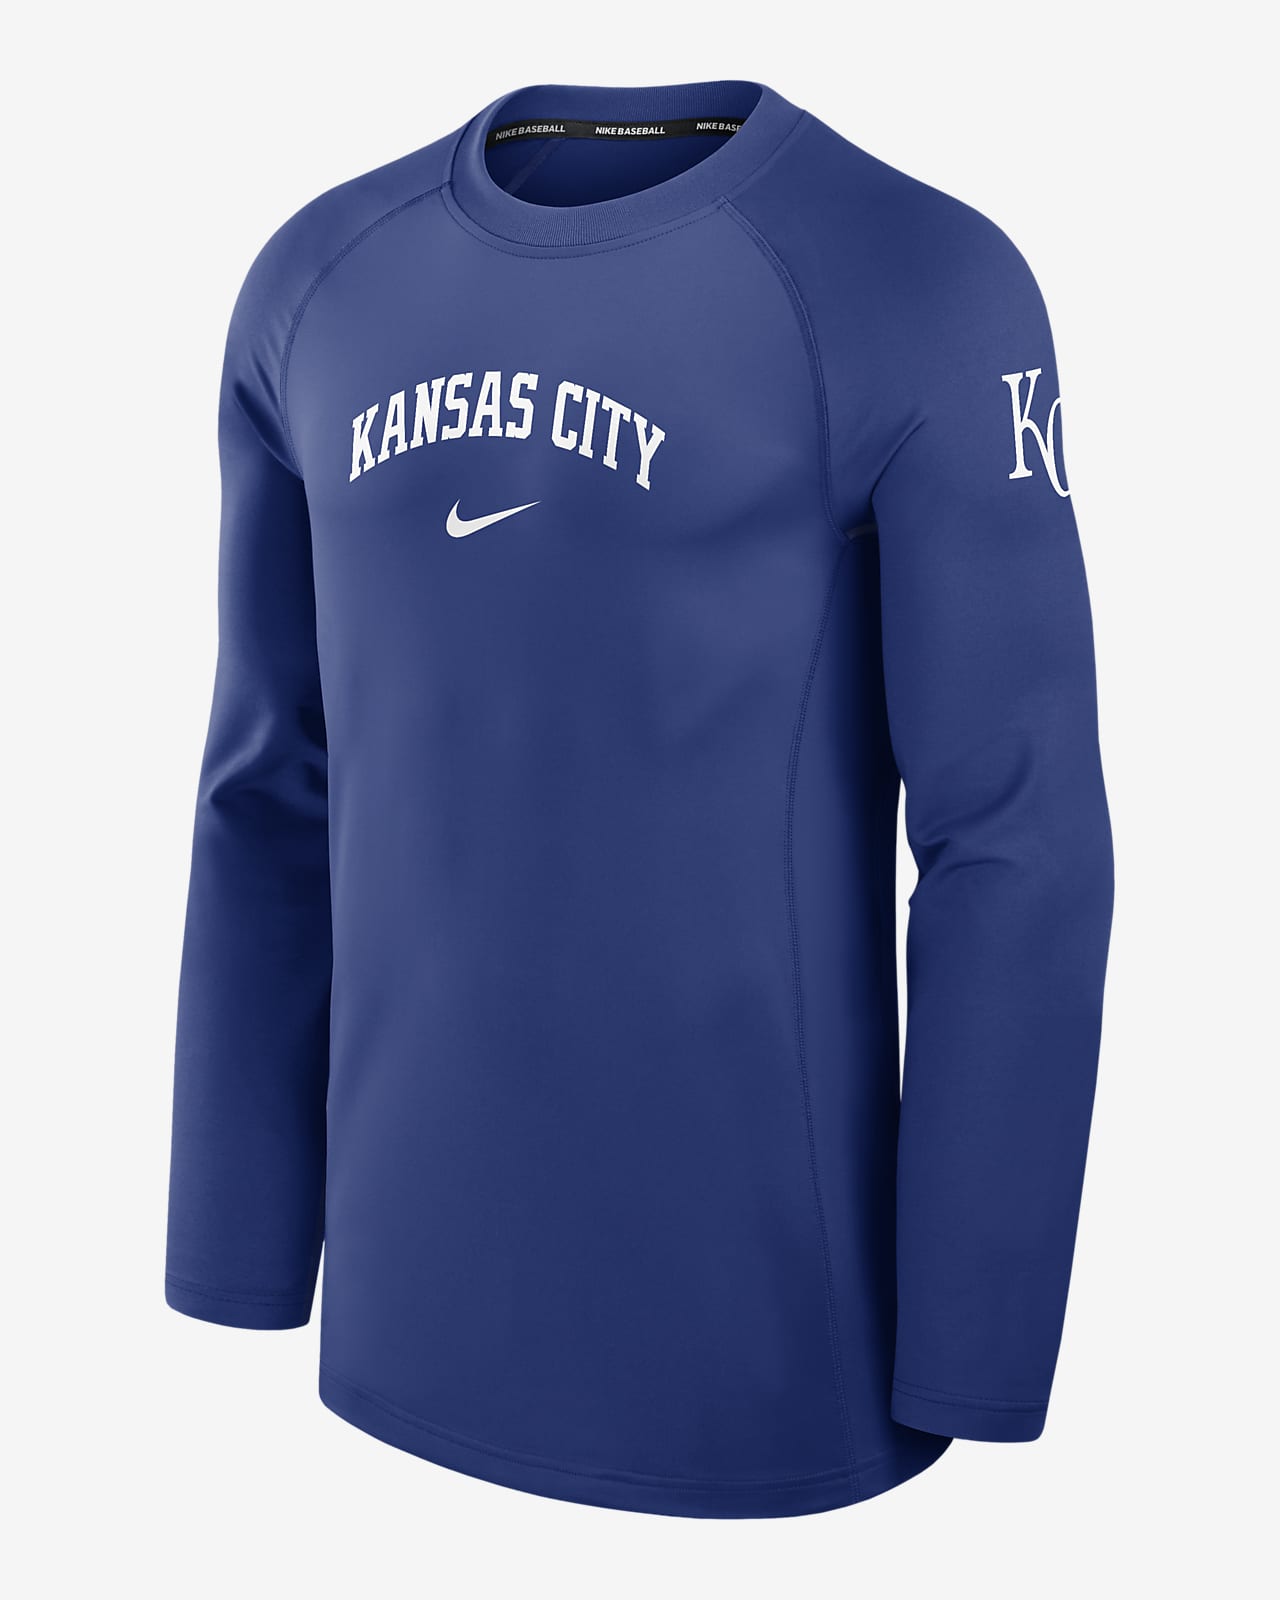 Kansas City Royals Authentic Collection Game Time Men's Nike Dri-FIT MLB Long-Sleeve T-Shirt